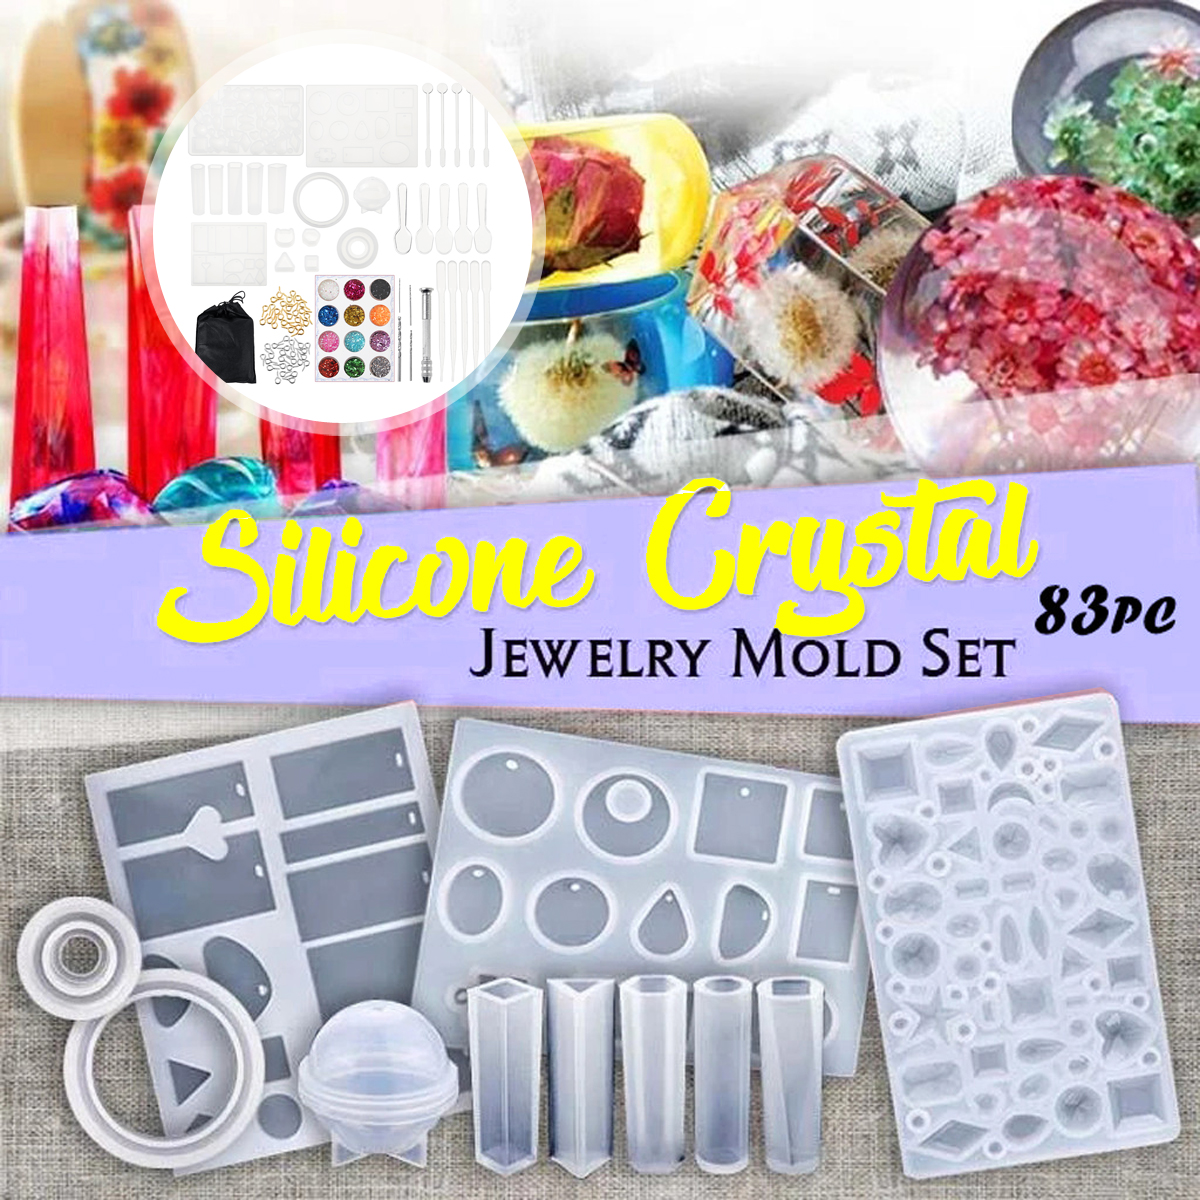 83x-Silicone-Resin-Casting-Mold-Tool-Sets-Kit-DIY-Pendant-Jewelry-Bracelet-Making-1808640-6